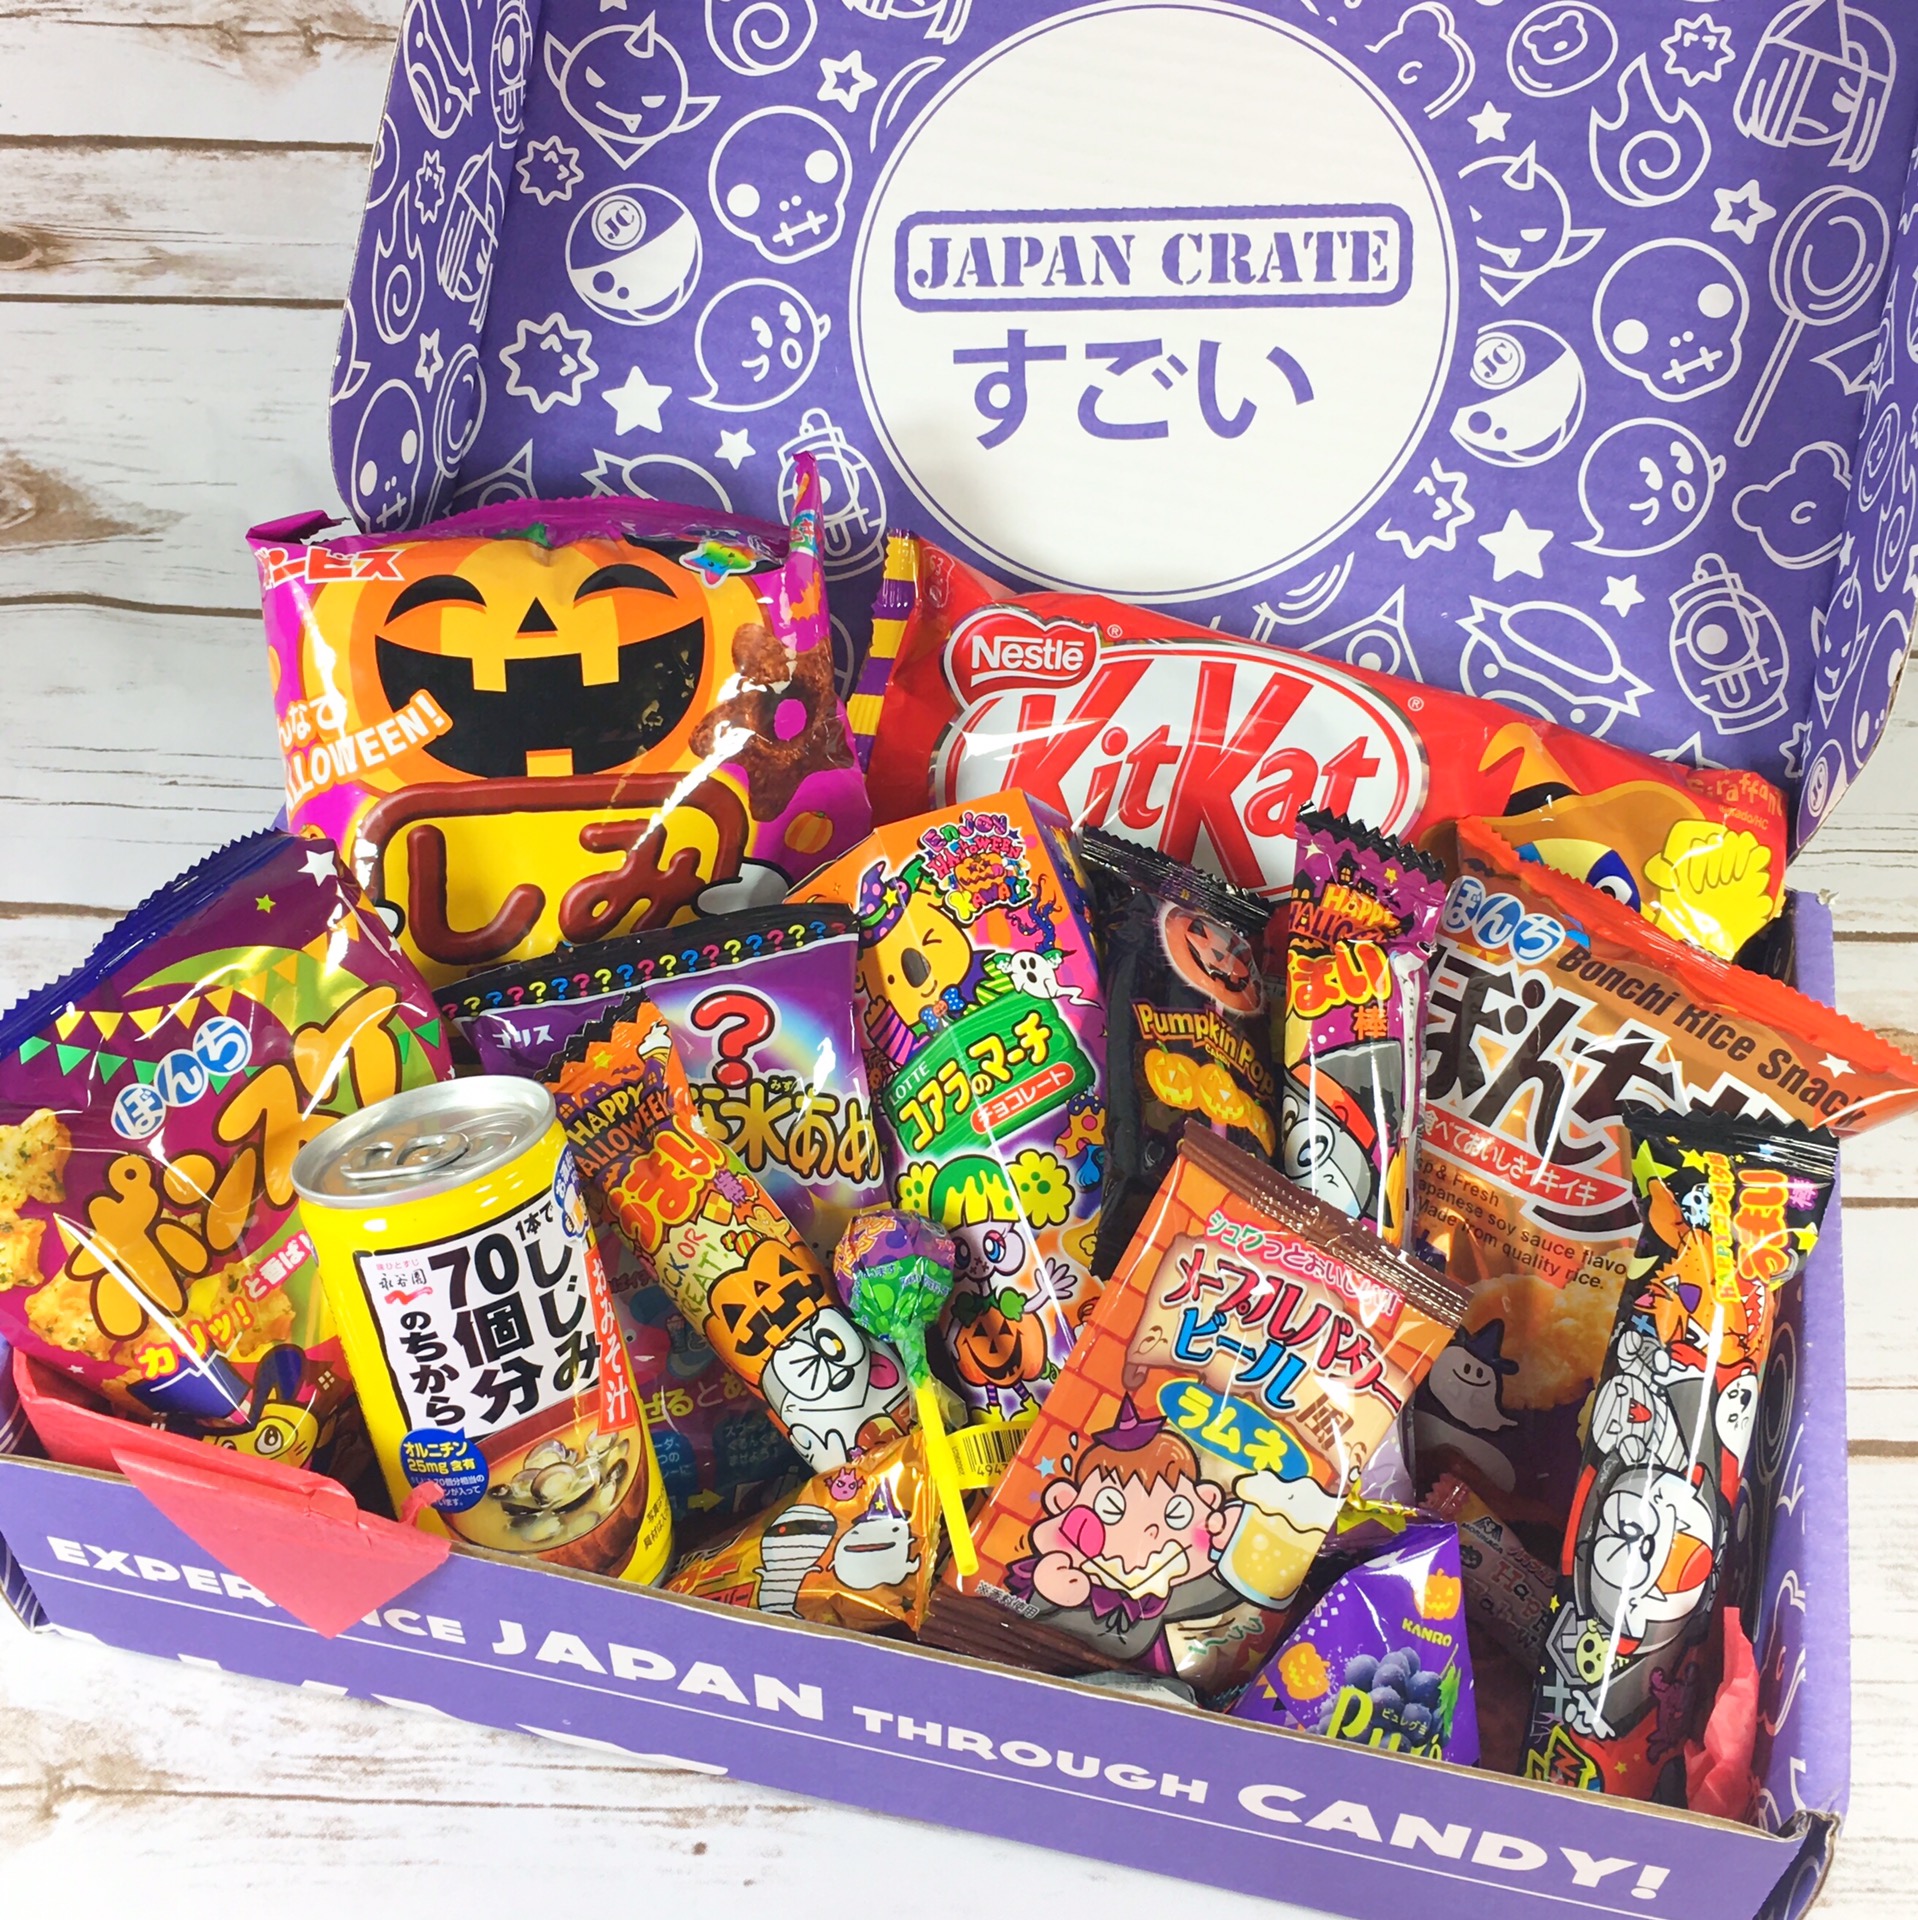 Japan Crate October 2017 Subscription Box Review + Coupon ...